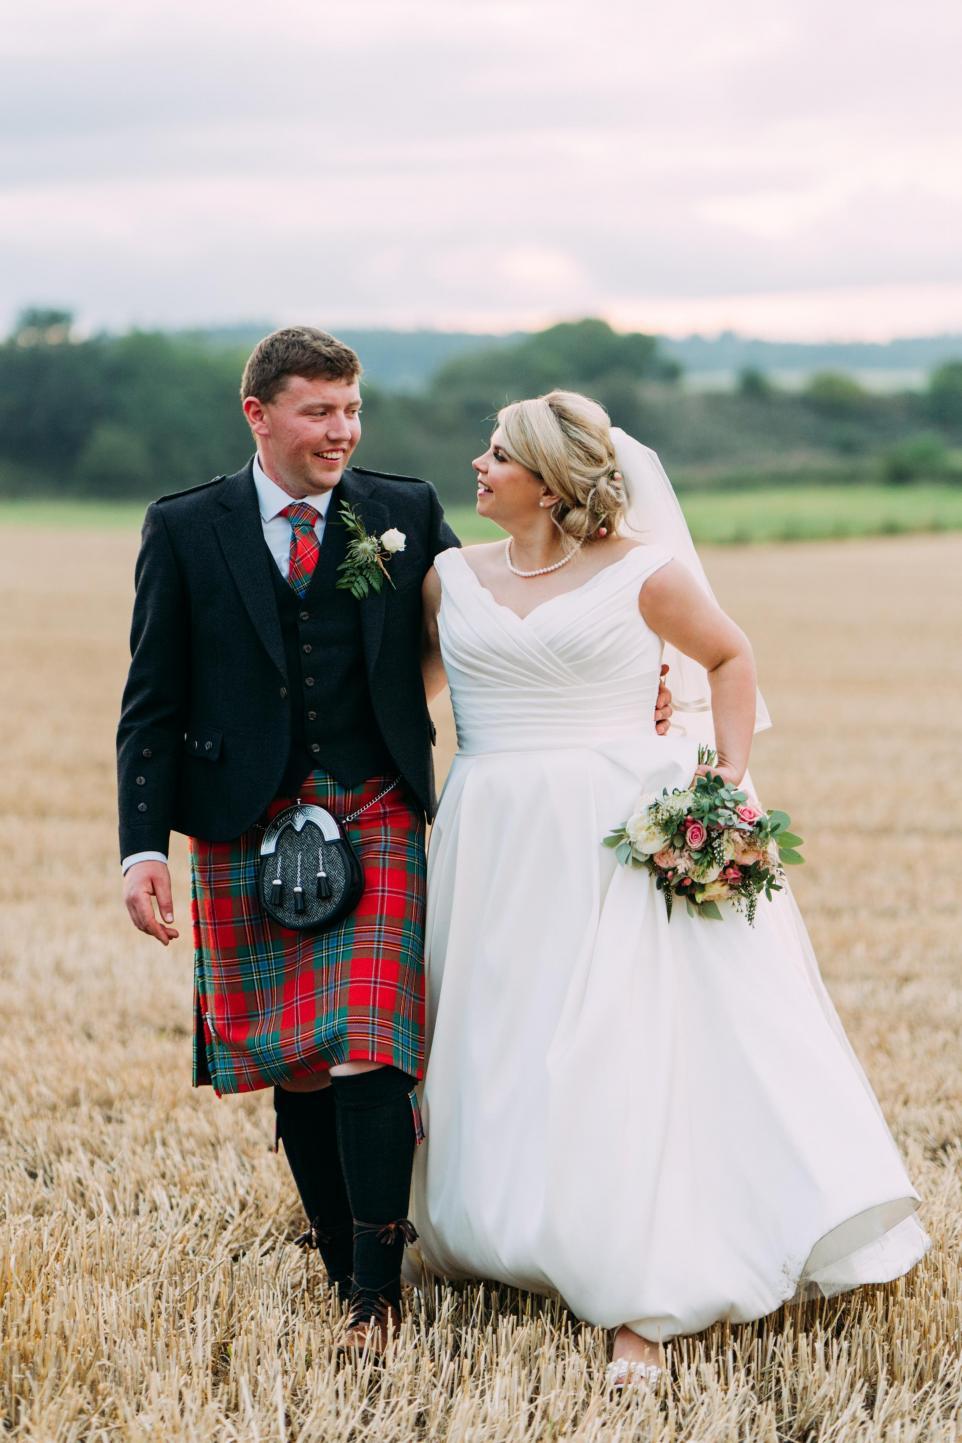 Recently wed were Sarah-Jane Urquhart, formerly of Stirling, and Alasdair MacLean, Heylipol Farm, Isle of Tiree, at St Ninians Old Parish Church, Stirling, followed by a reception at Dunblane Hydro Photo: Eilidh Robertson